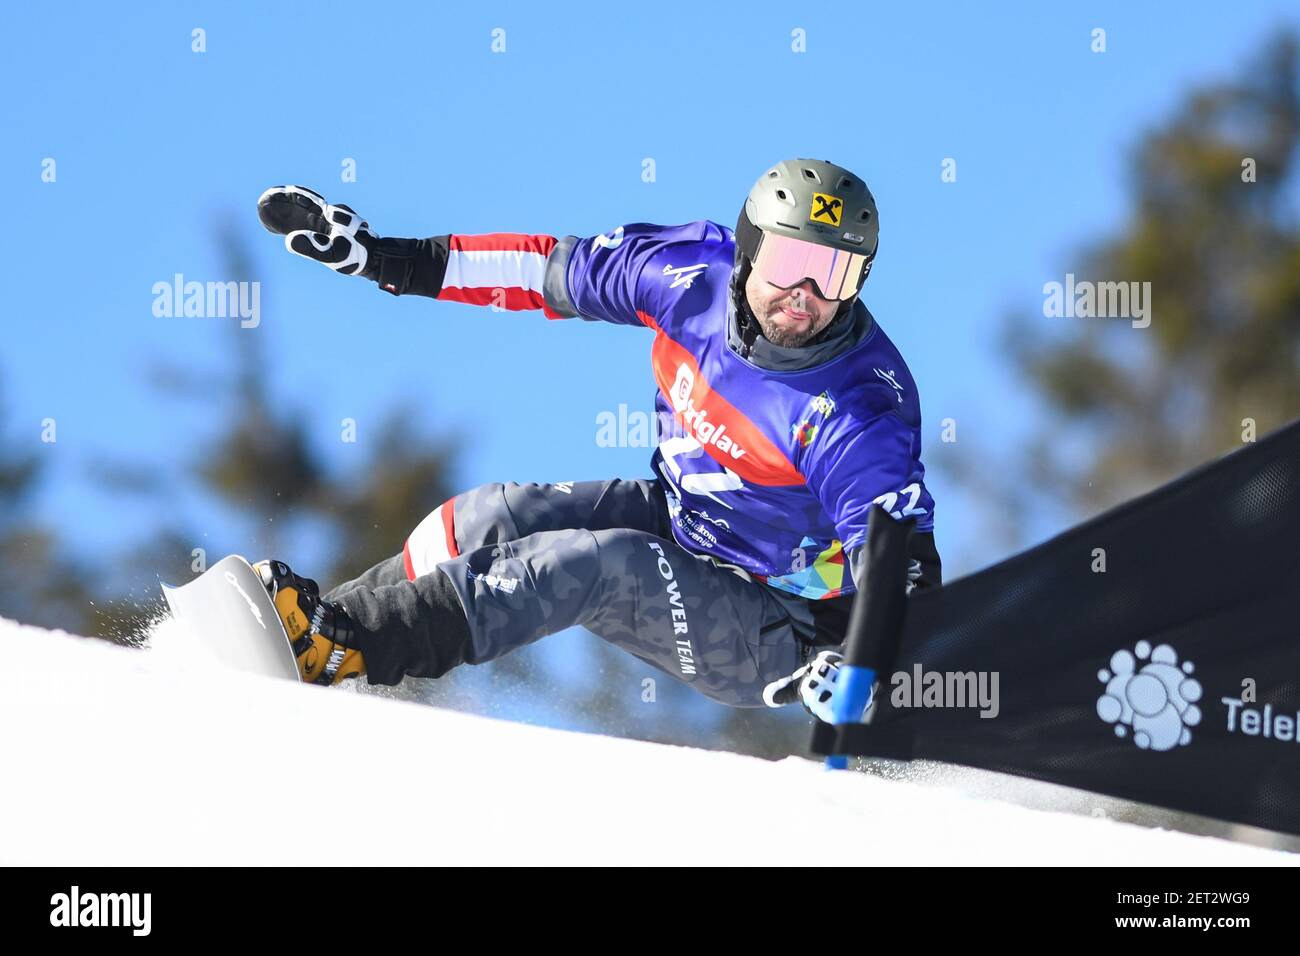 Rogla, Slovenia. 01st Mar, 2021. Andreas Prommegger of Austria in action  during the first qualifying round of Men's Parallel Giant Slalom at FIS  Snowboard Alpine World Championship - Rogla 2021. Credit: SOPA